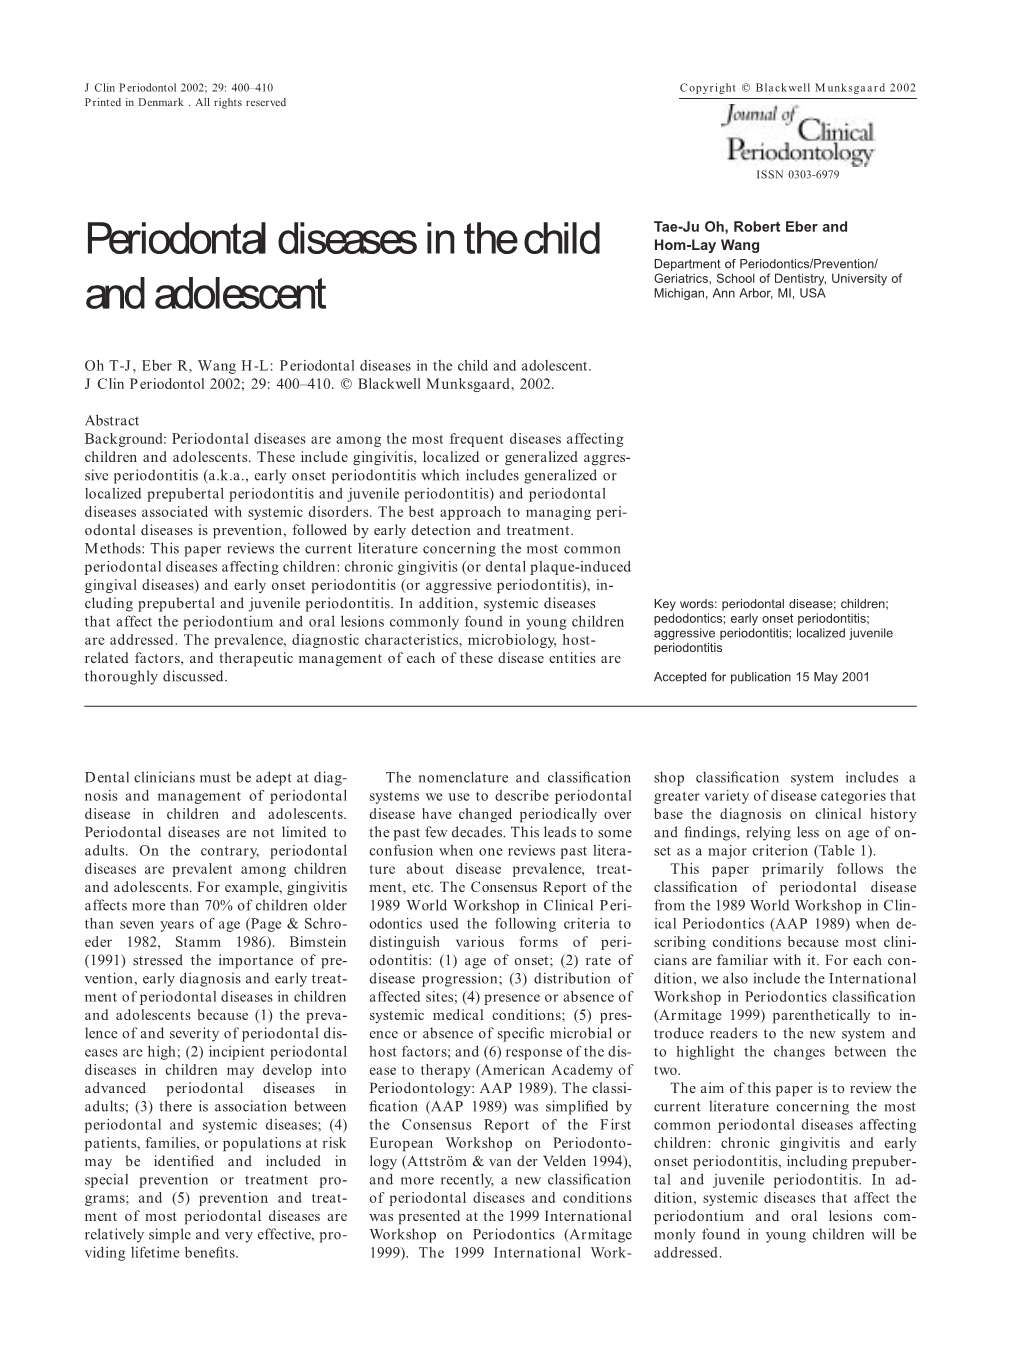 Periodontal Diseases in the Child and Adolescent